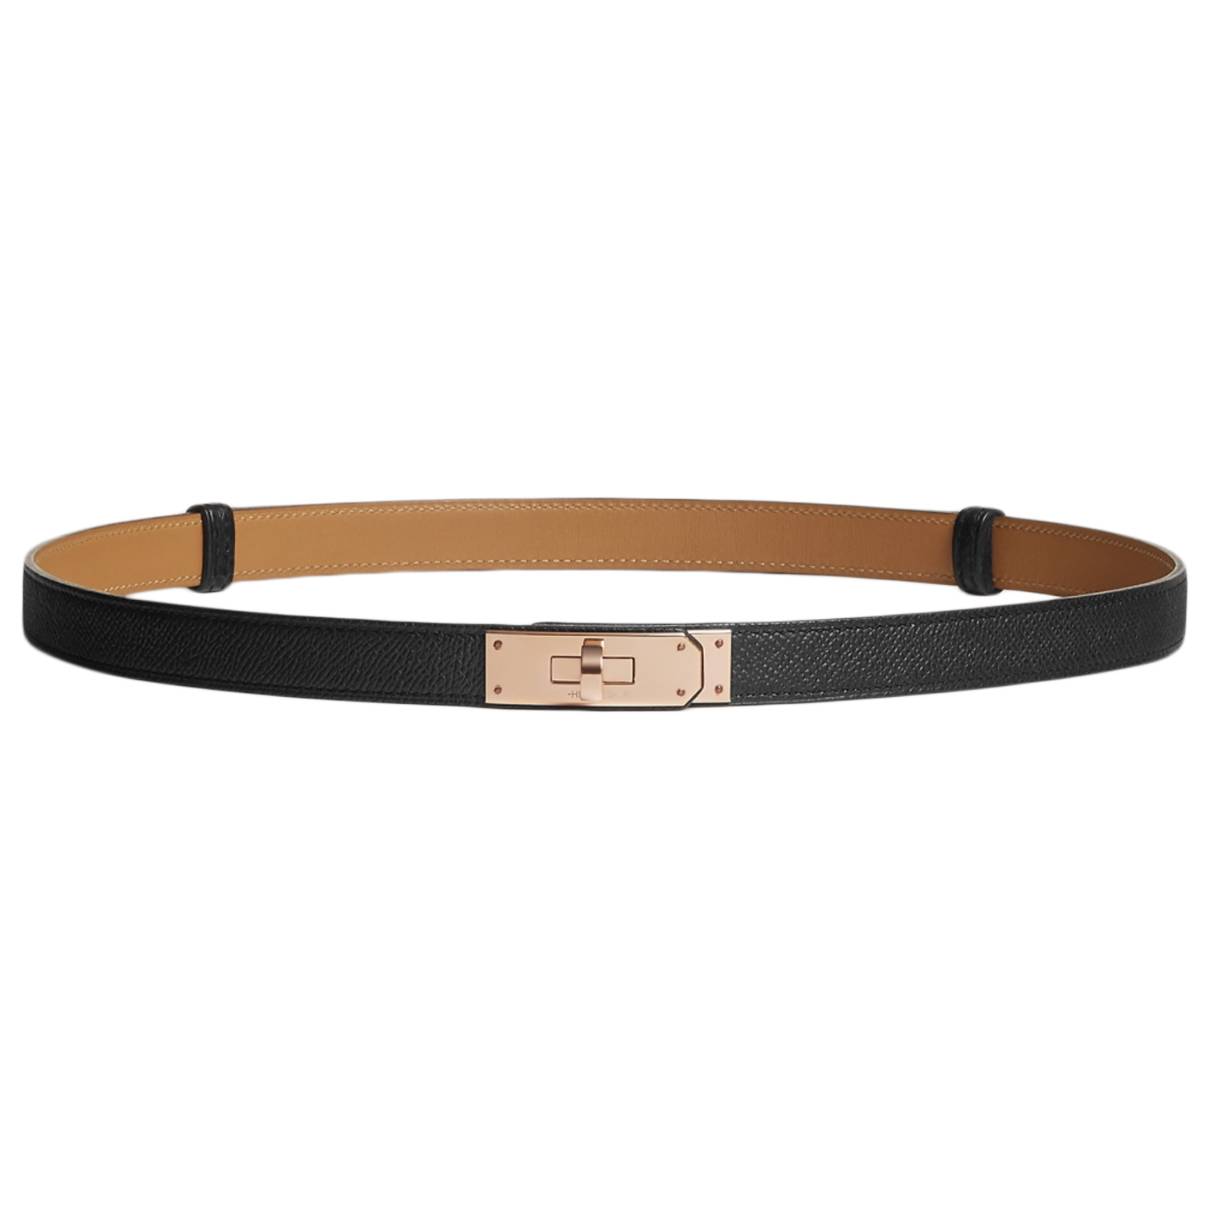 Hermès Authenticated Kelly Leather Belt